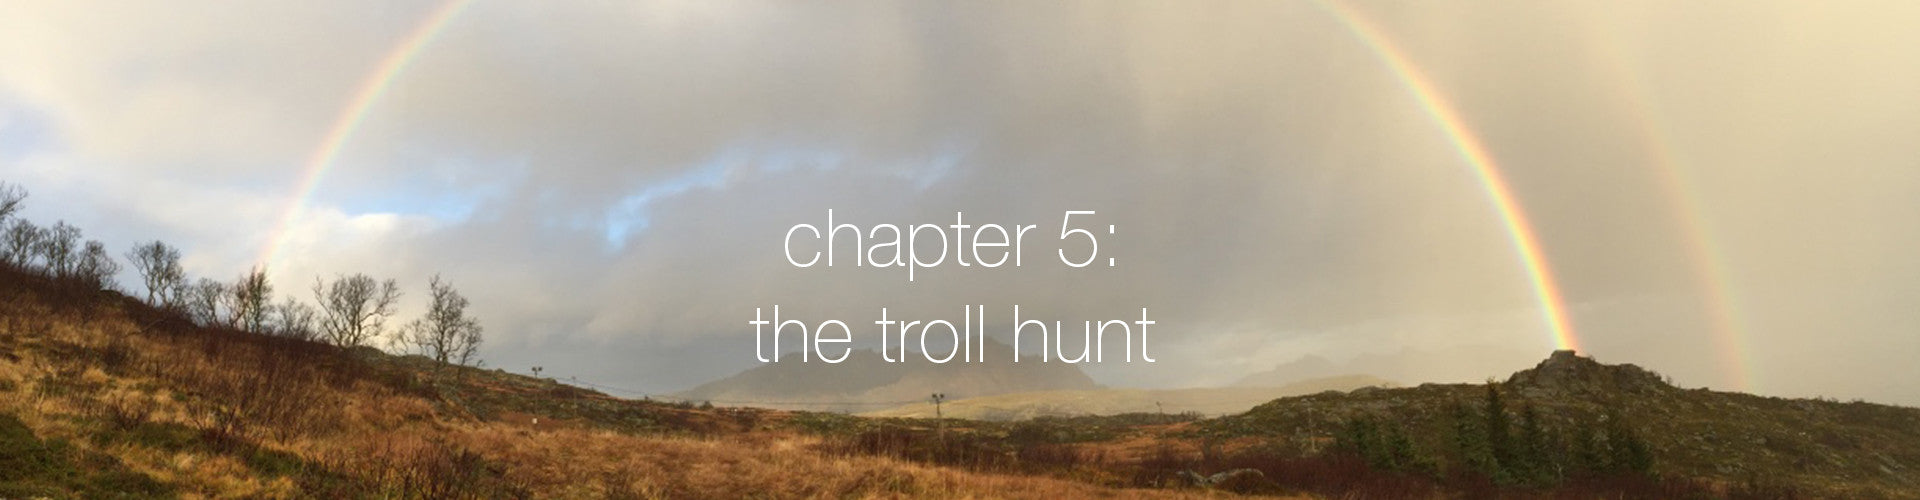 Chapter 5: The Troll Hunt